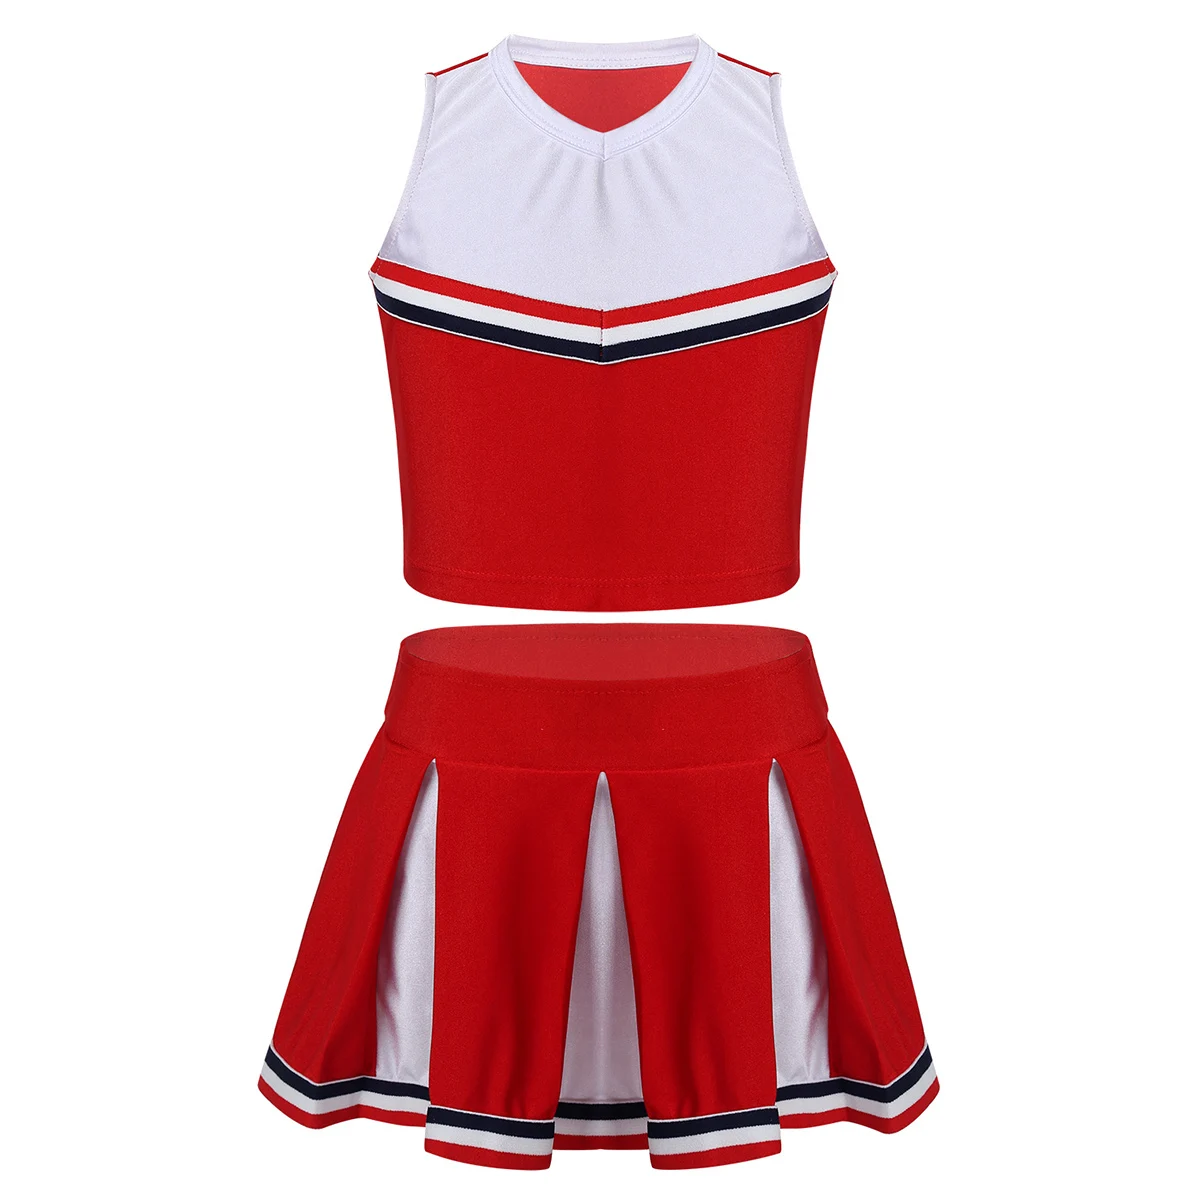 Luxury Kids Girls Cheer Leader Costume Outfit Shell Tank Top With ...